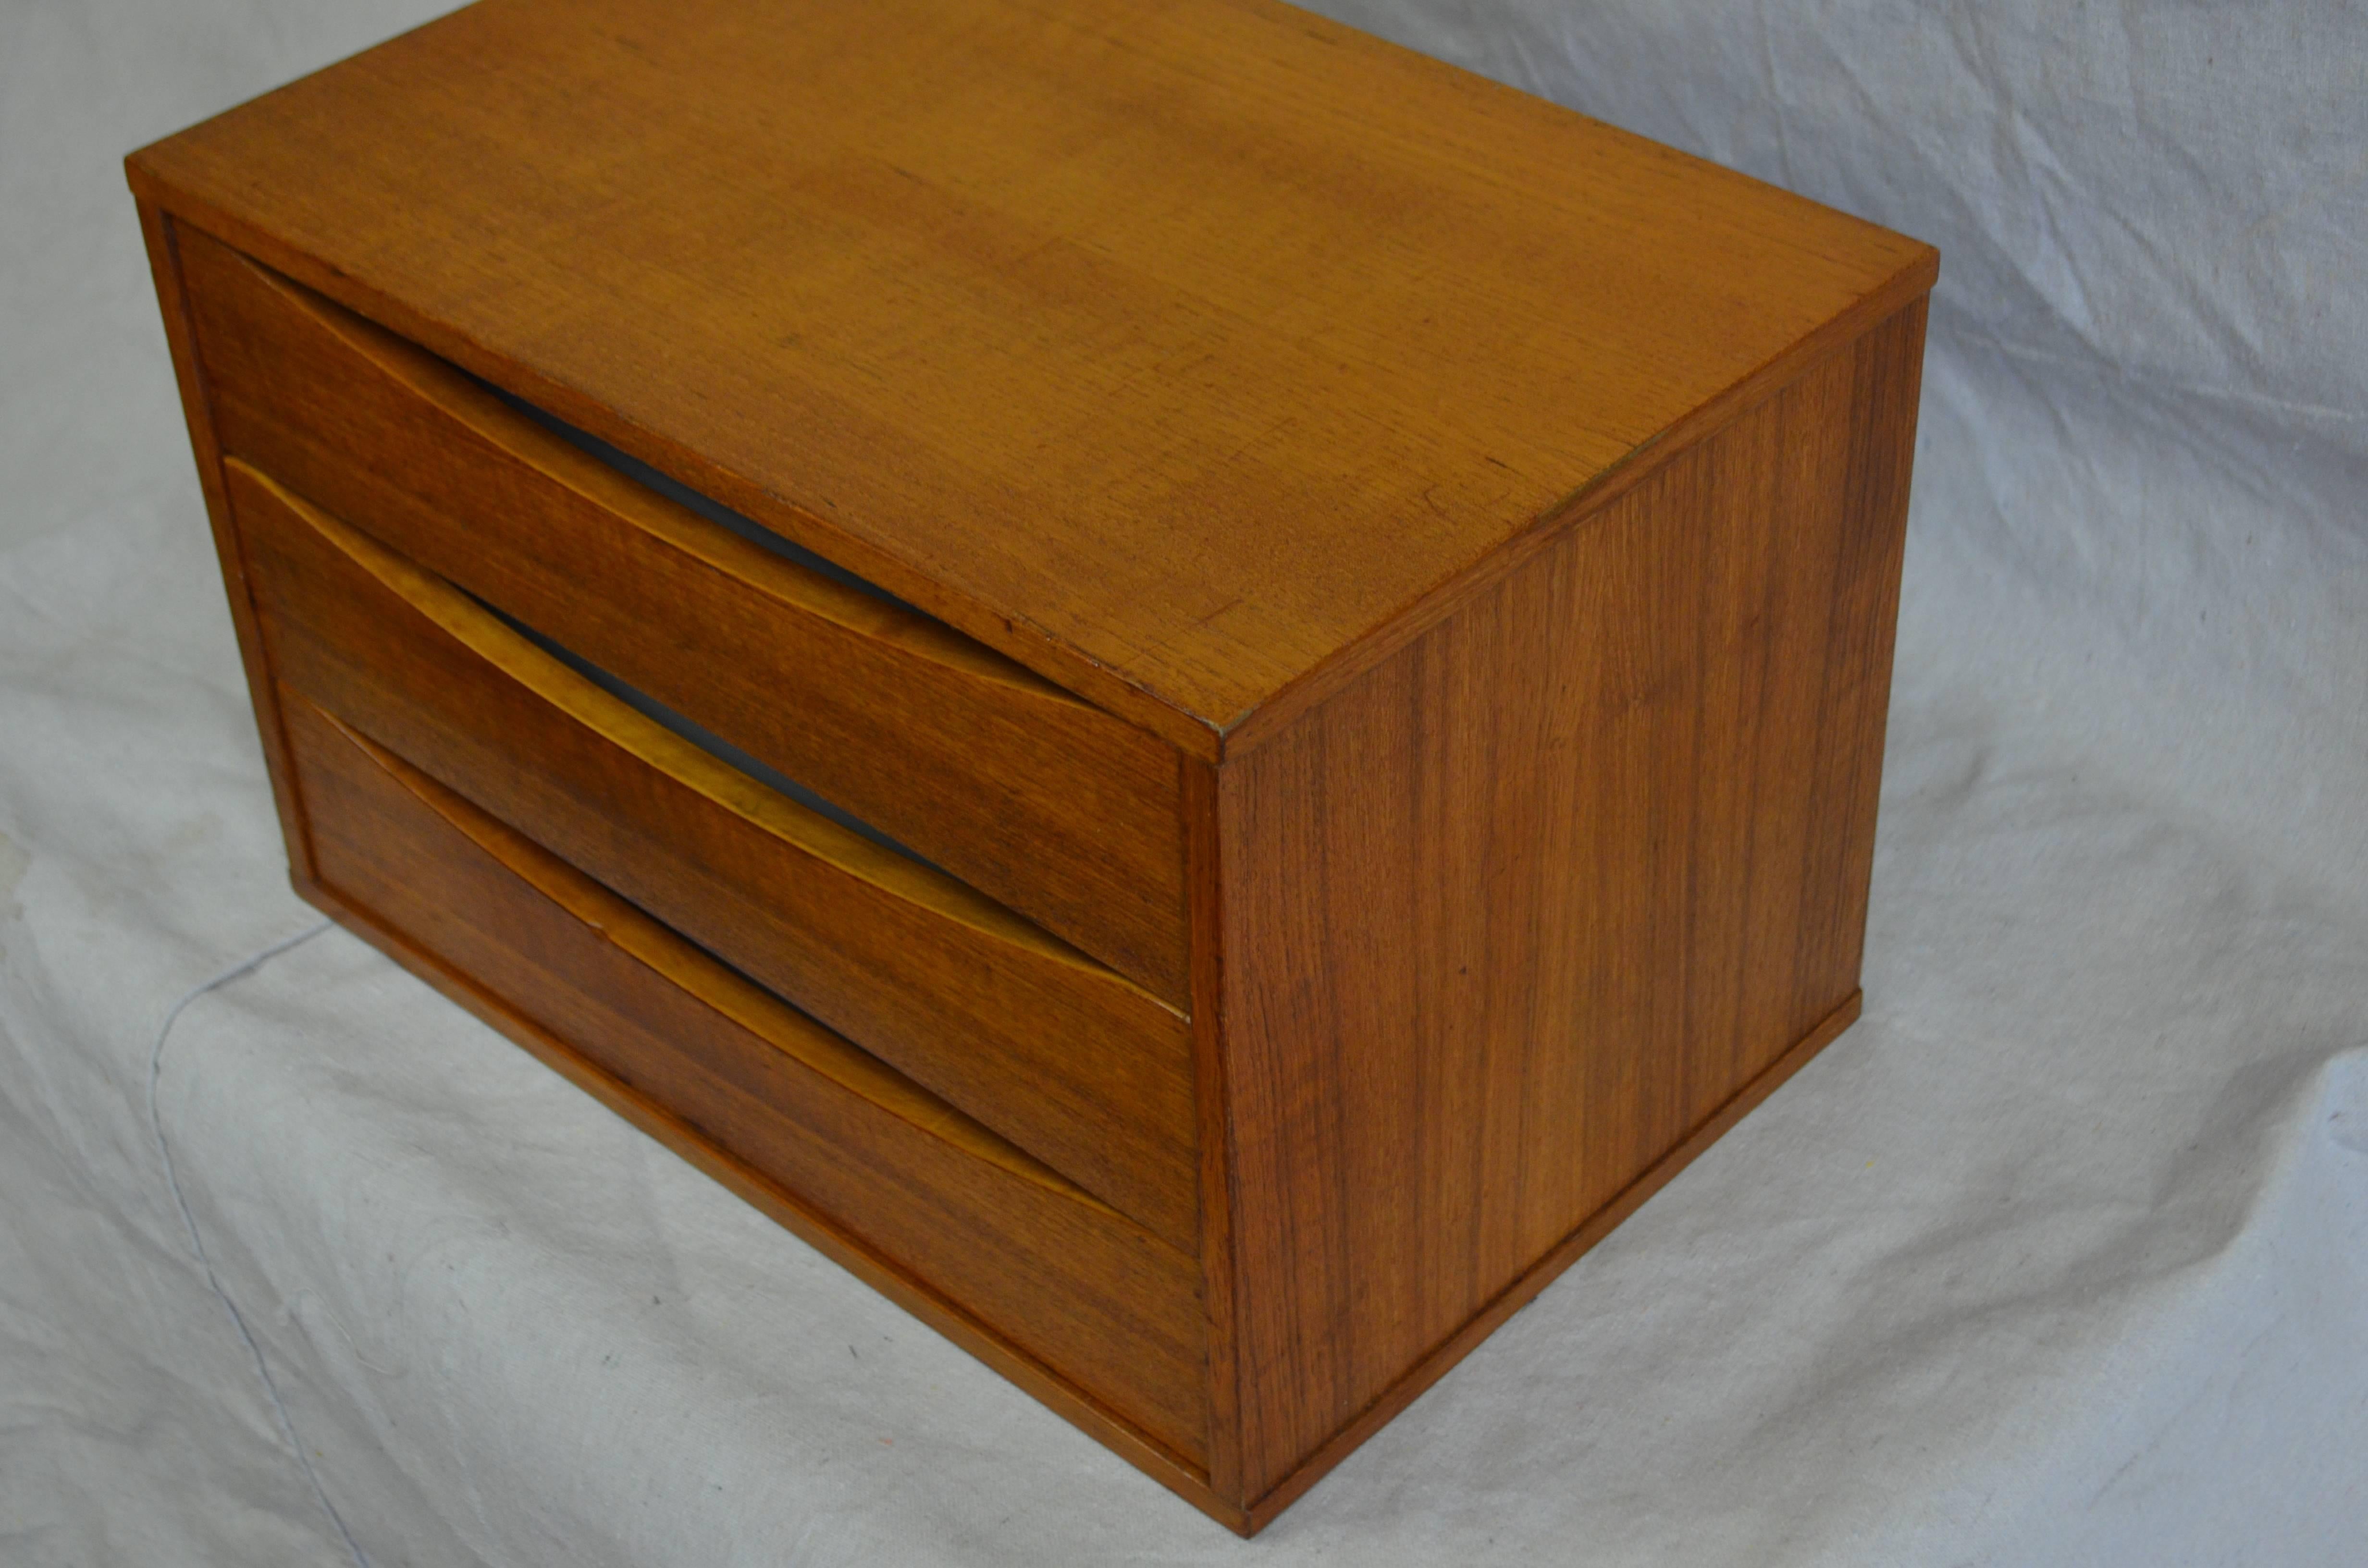 Jewelry box or letter box of teak with three drawers designed by Arne Vodder. Made in Sweden. Sweet, clean-lined, exquisitely-appointed with striking wood grain inside and out.